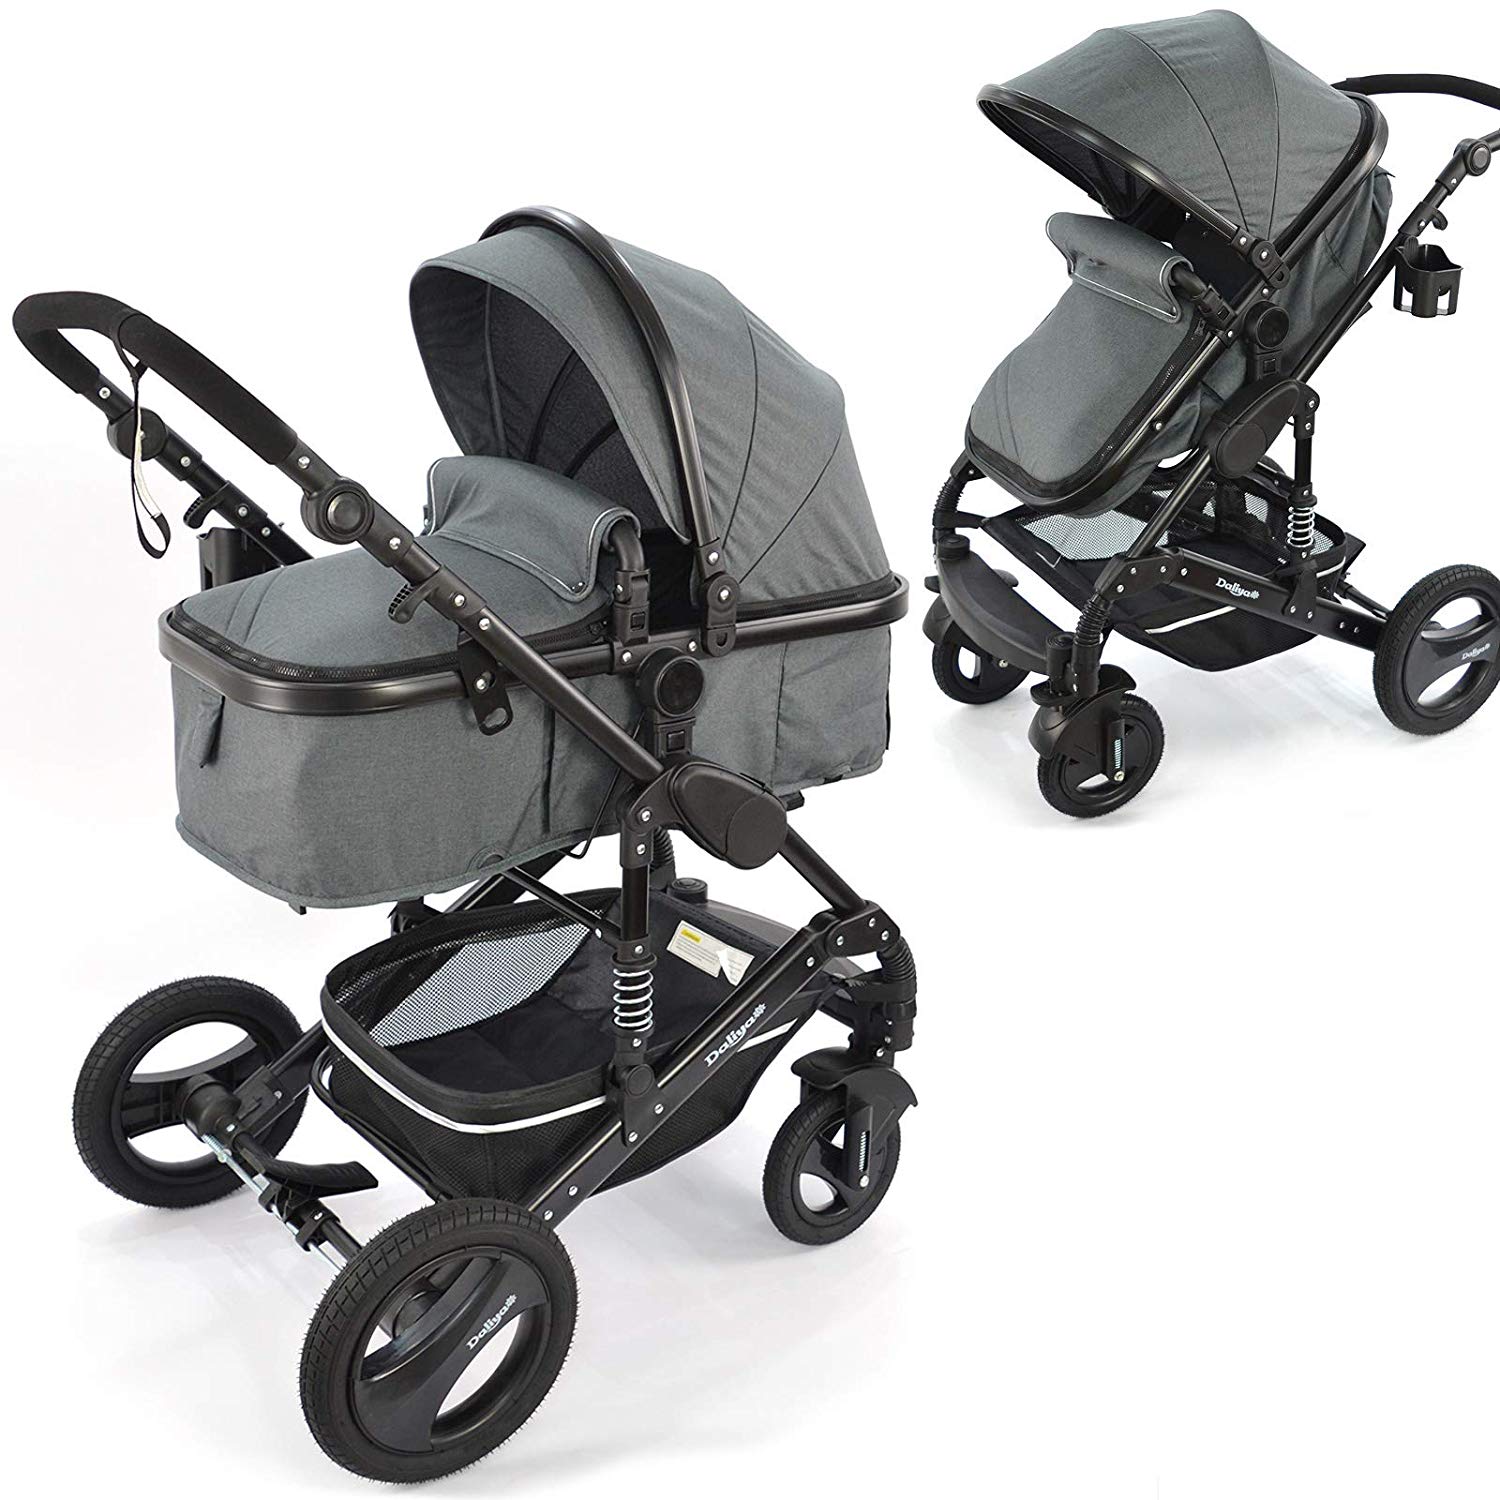 Combi pram 2-in-1 Bambimo with aluminium frame in many different colours – click system – all 4 wheels to remove – with extra large shopping basket – 2 in 1 sports seat – baby bath space saving xl